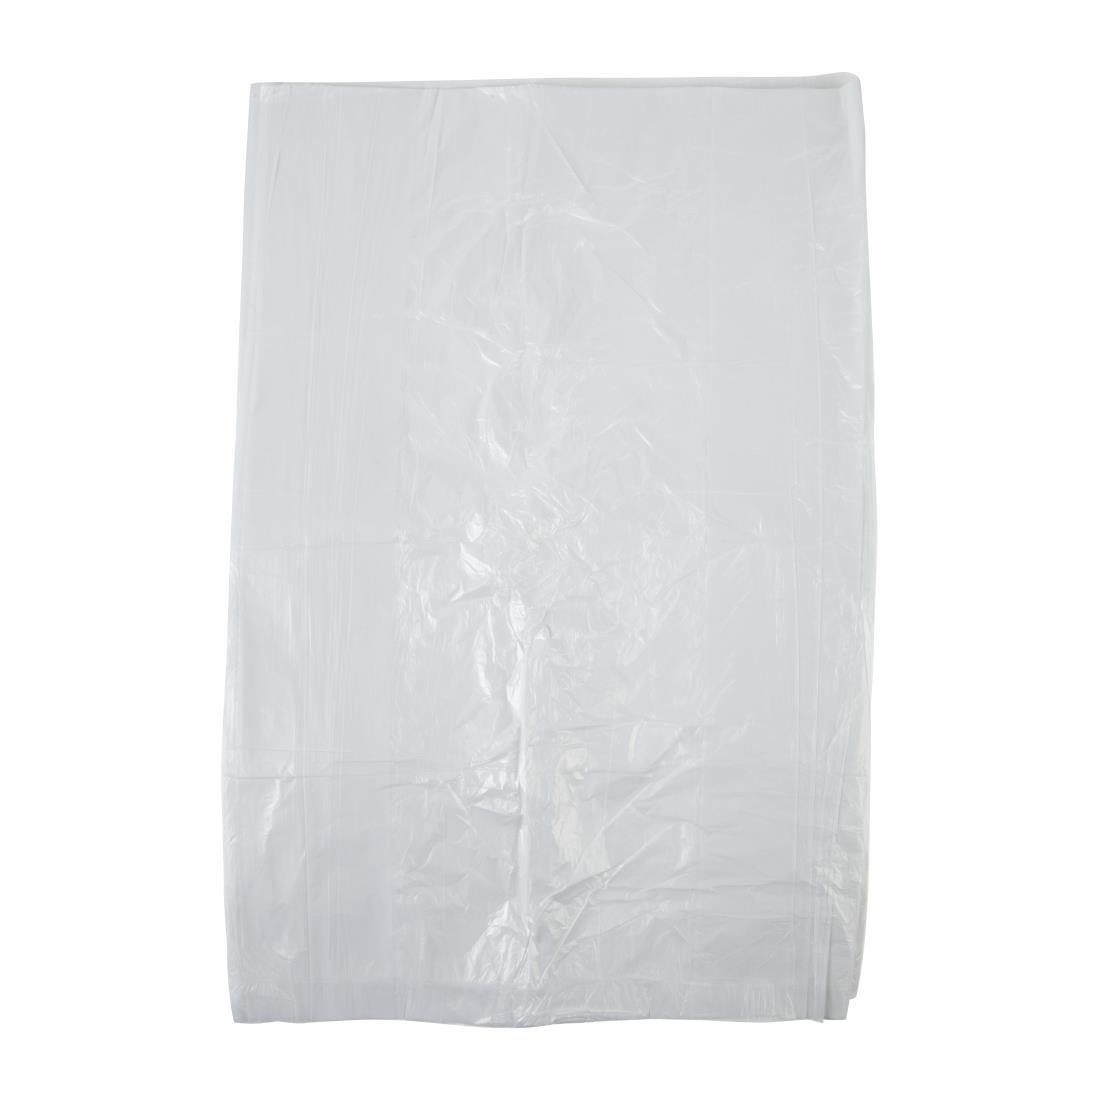 Jantex Small White Pedal Bin Liners 30Ltr (Pack of 1000) - GF279  - 4